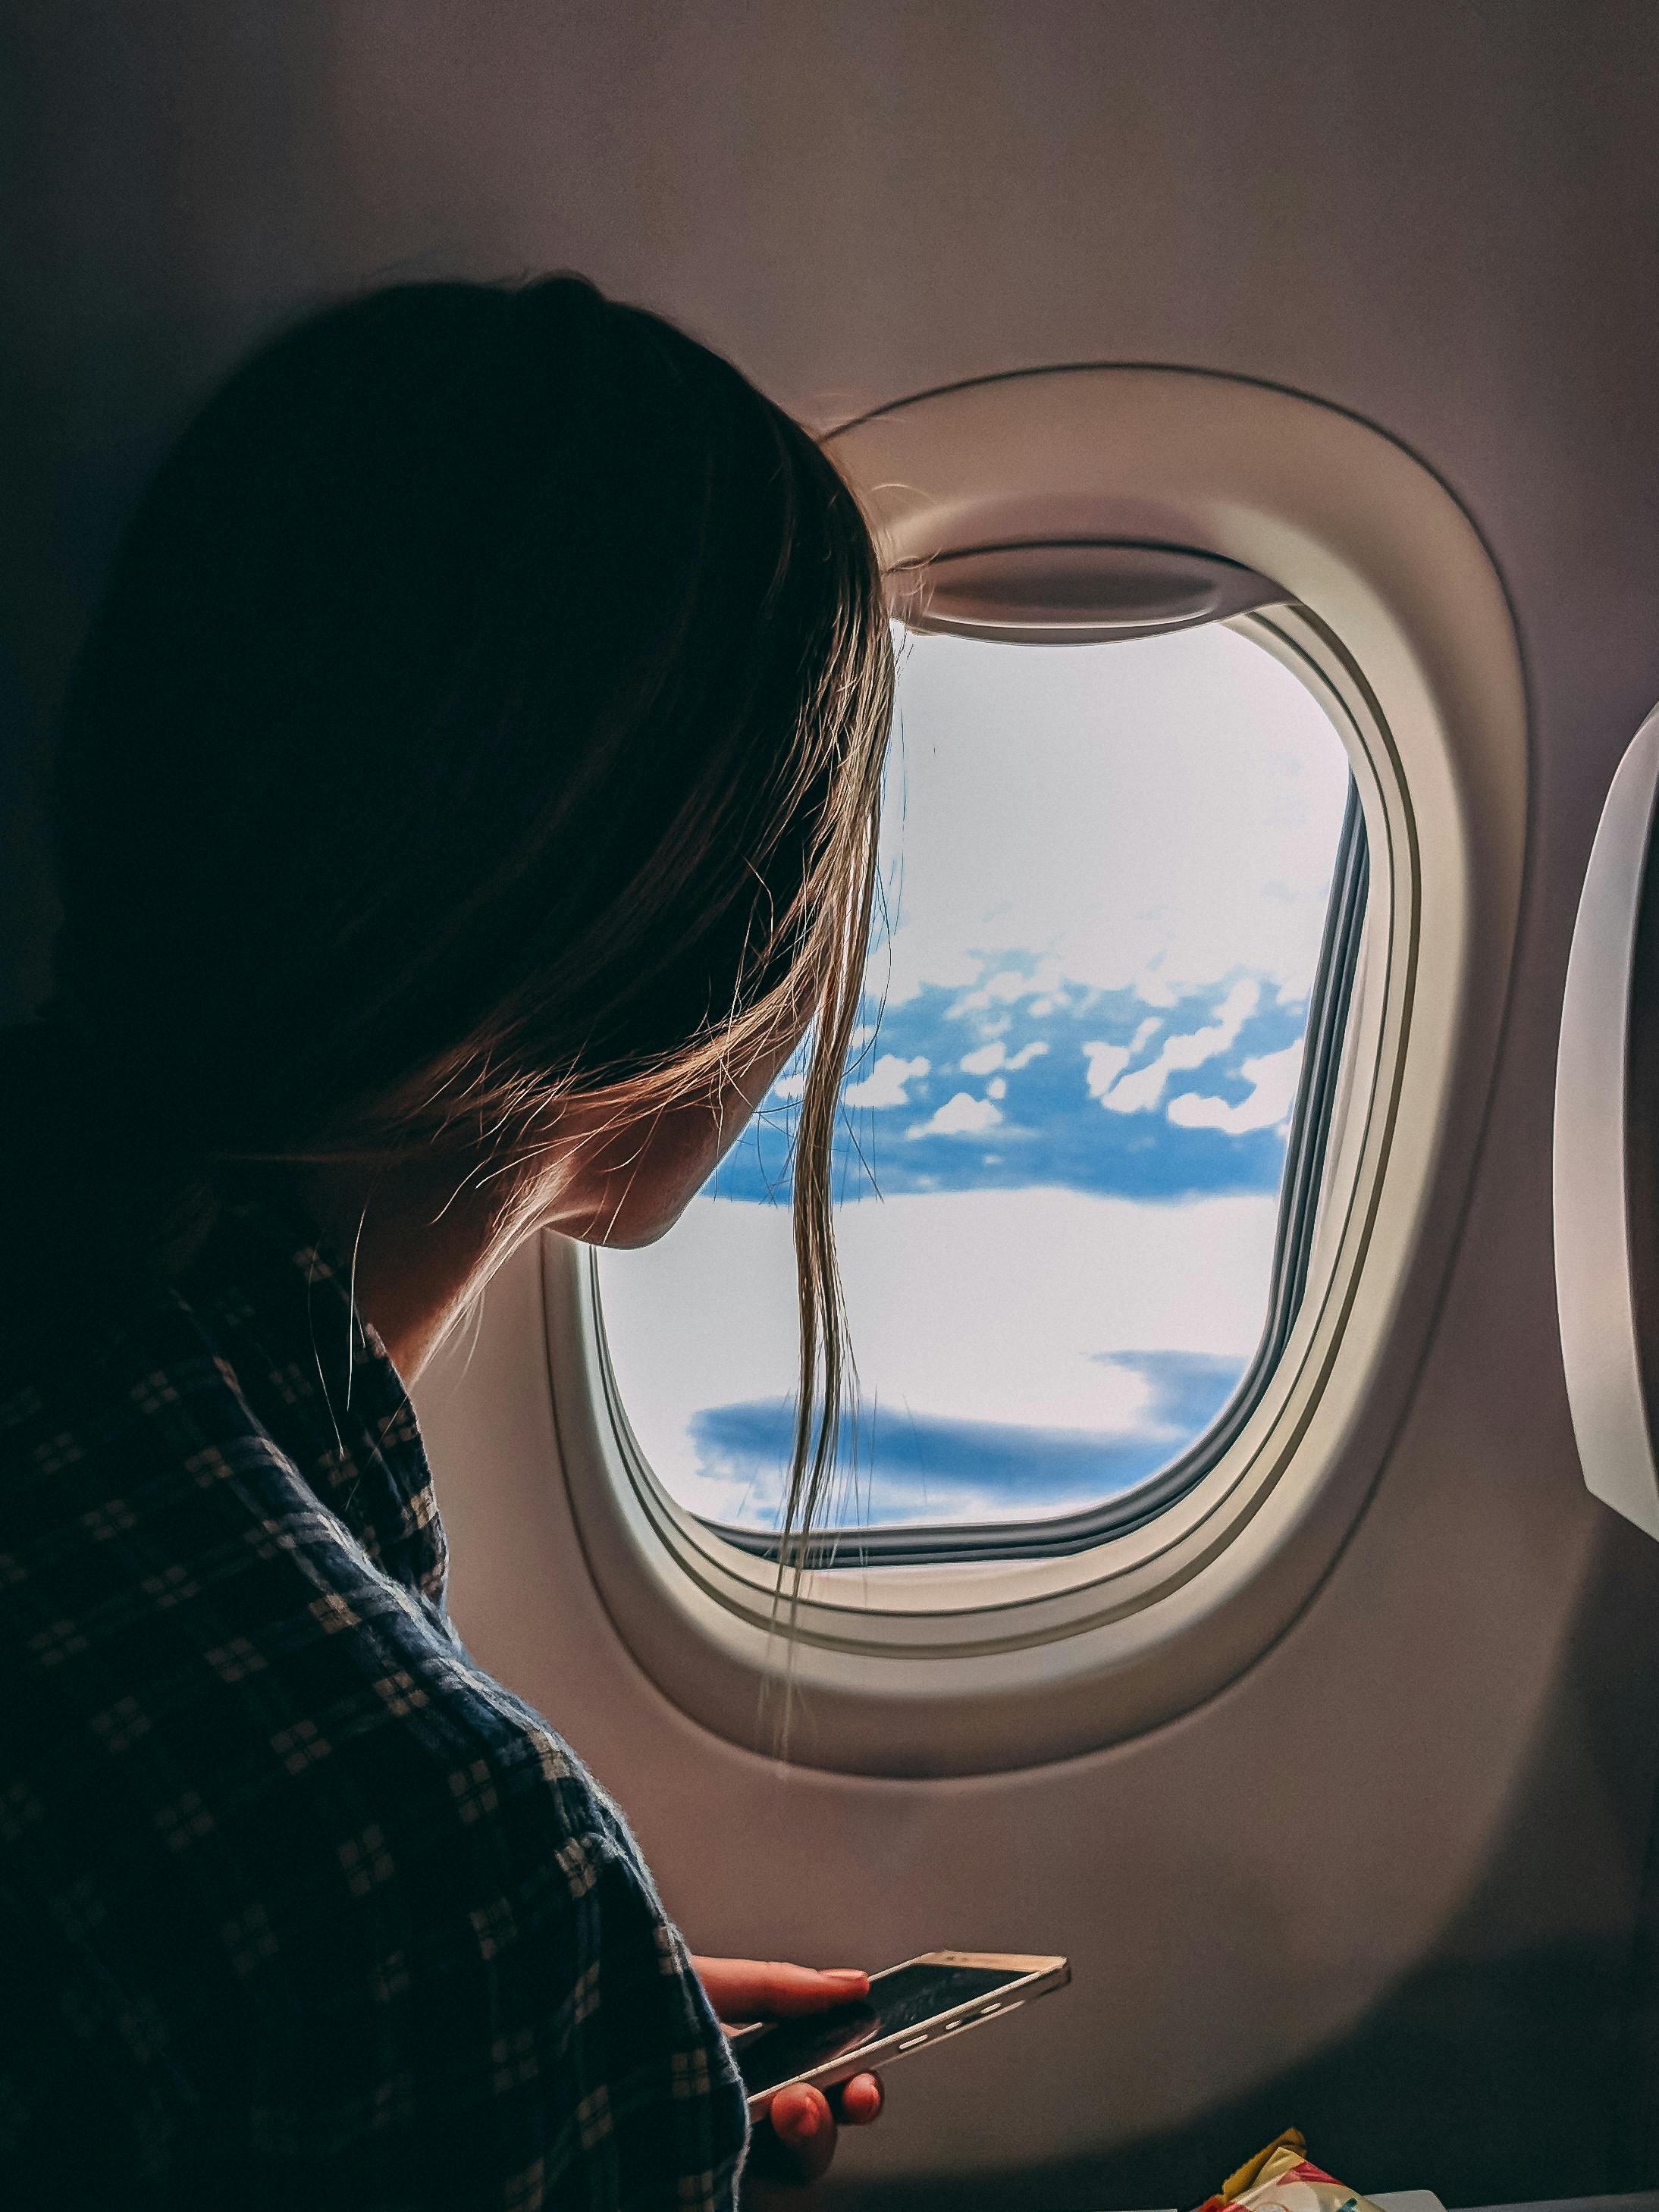 A woman holding a phone while seated on a plane | Source: Pexels